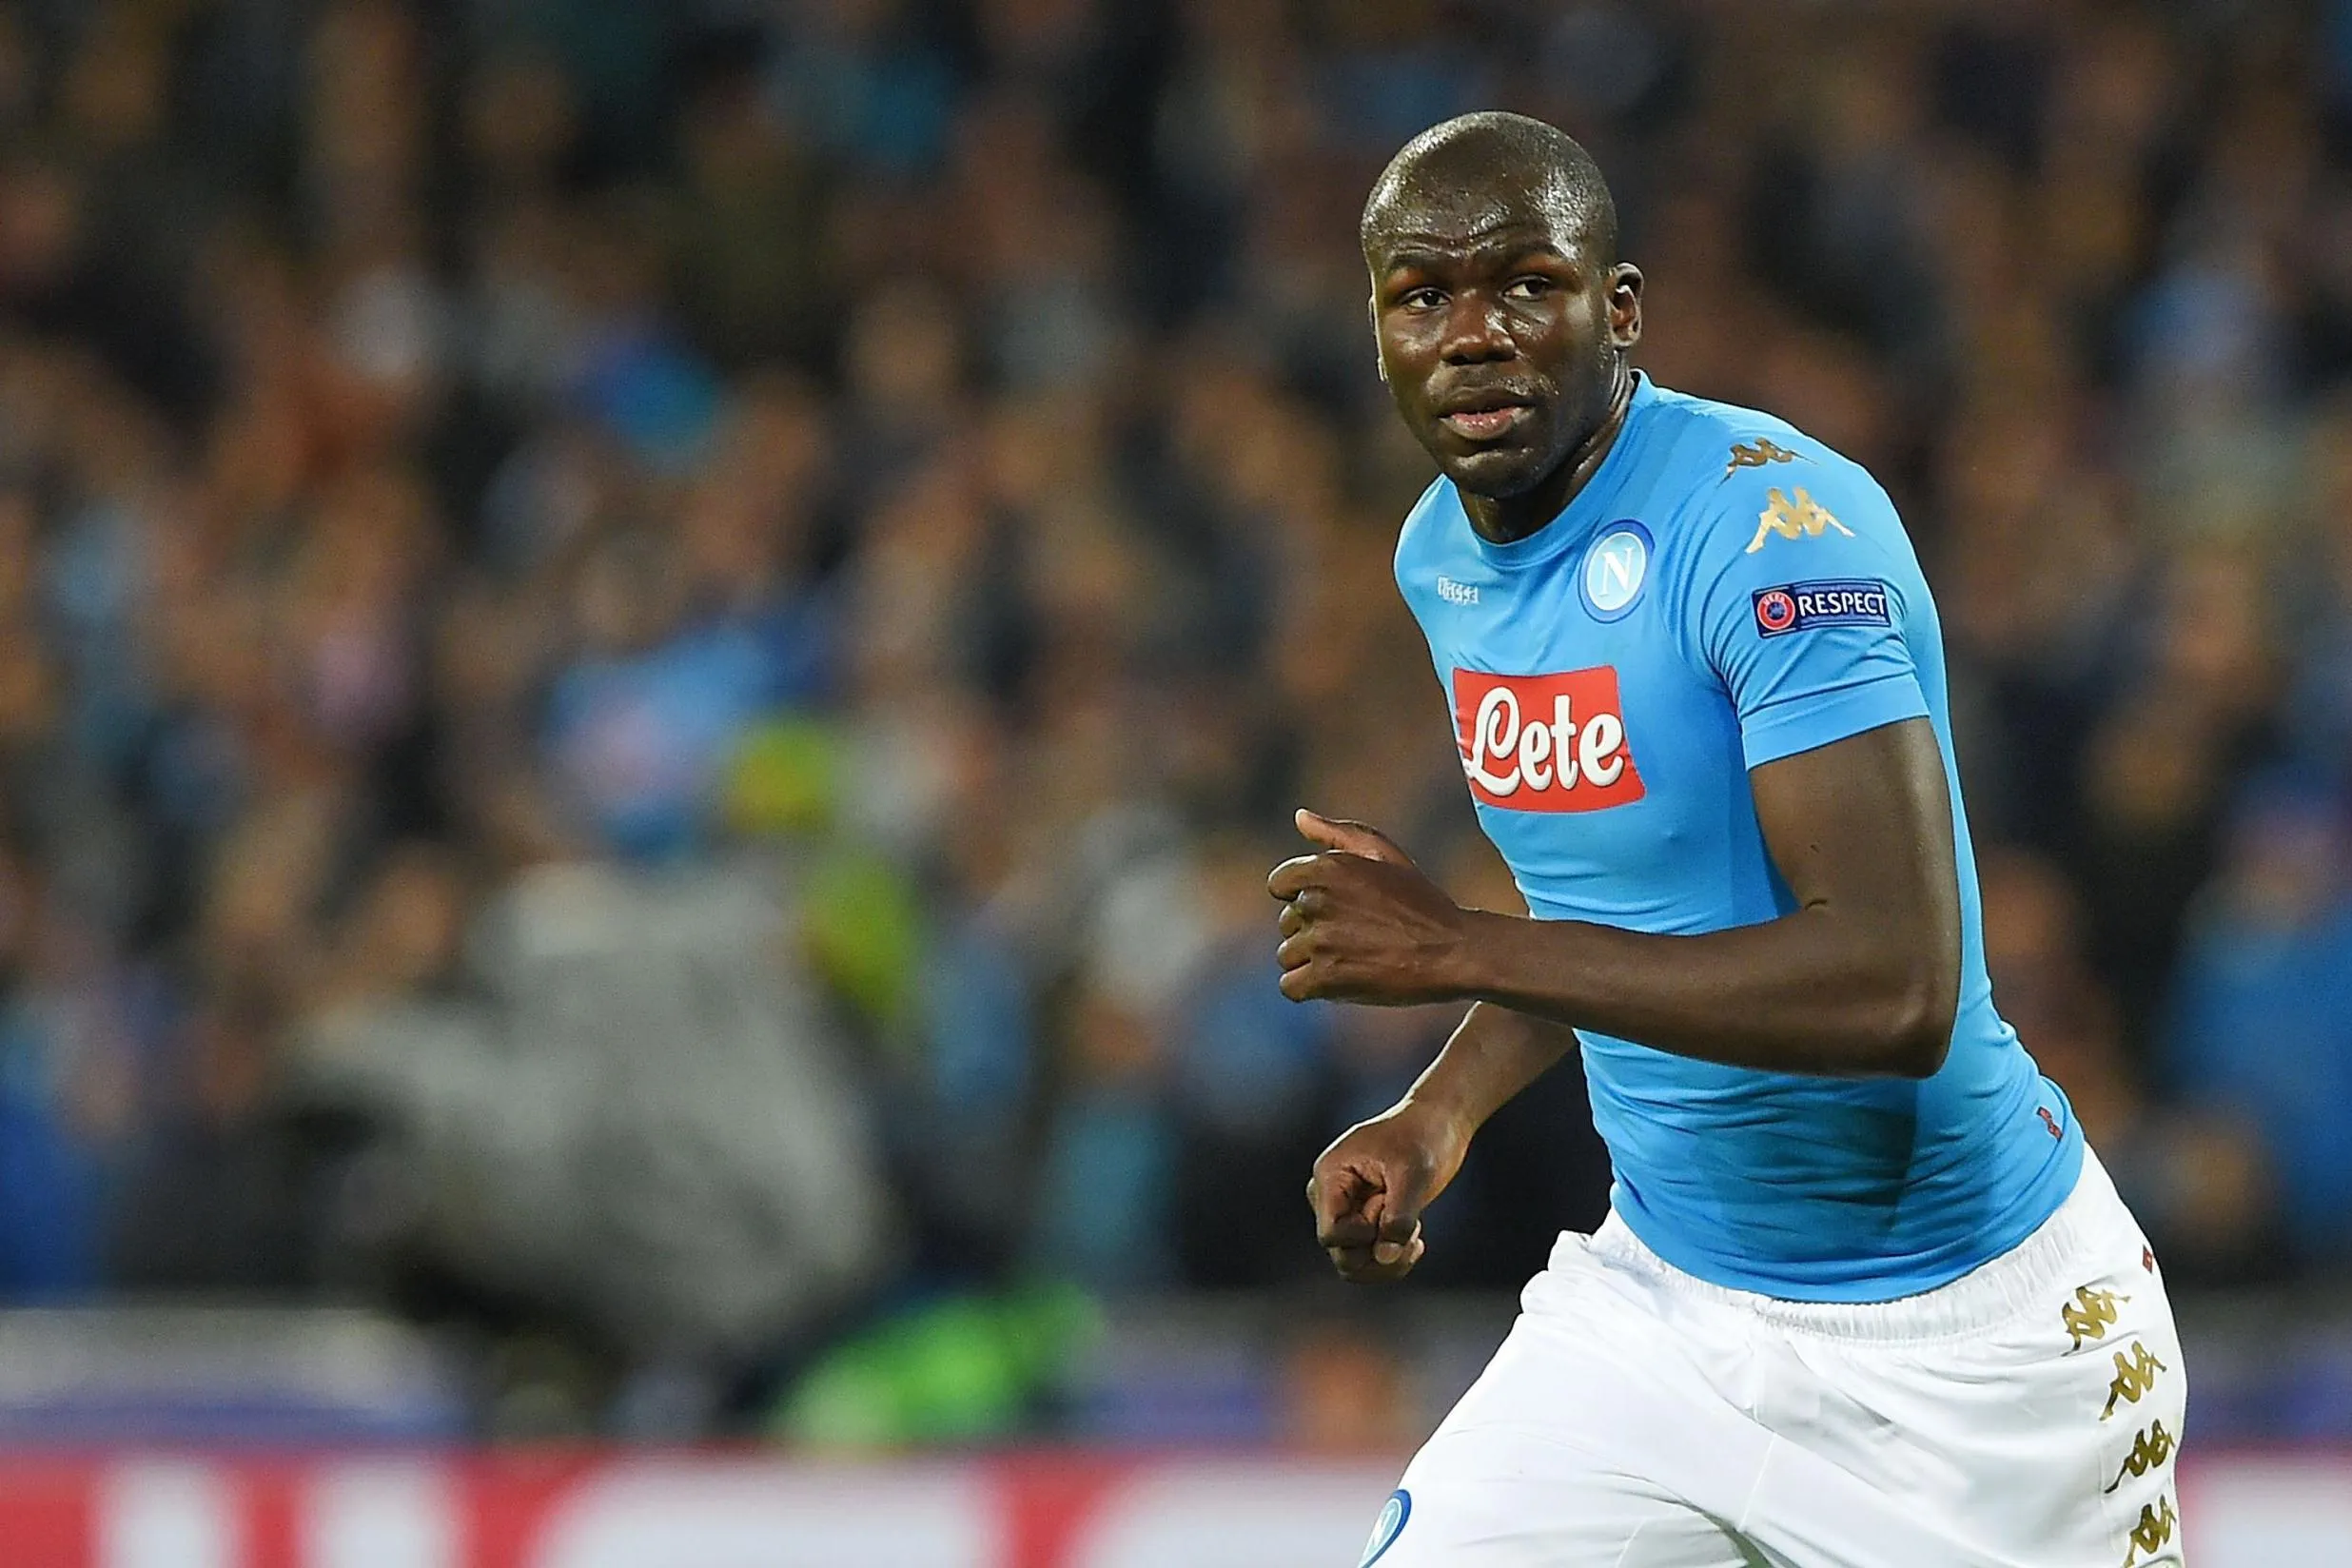 What Ole Gunnar Solskjaer's top scout reported back to Man Utd boss after watching Kalidou Koulibaly - Bóng Đá